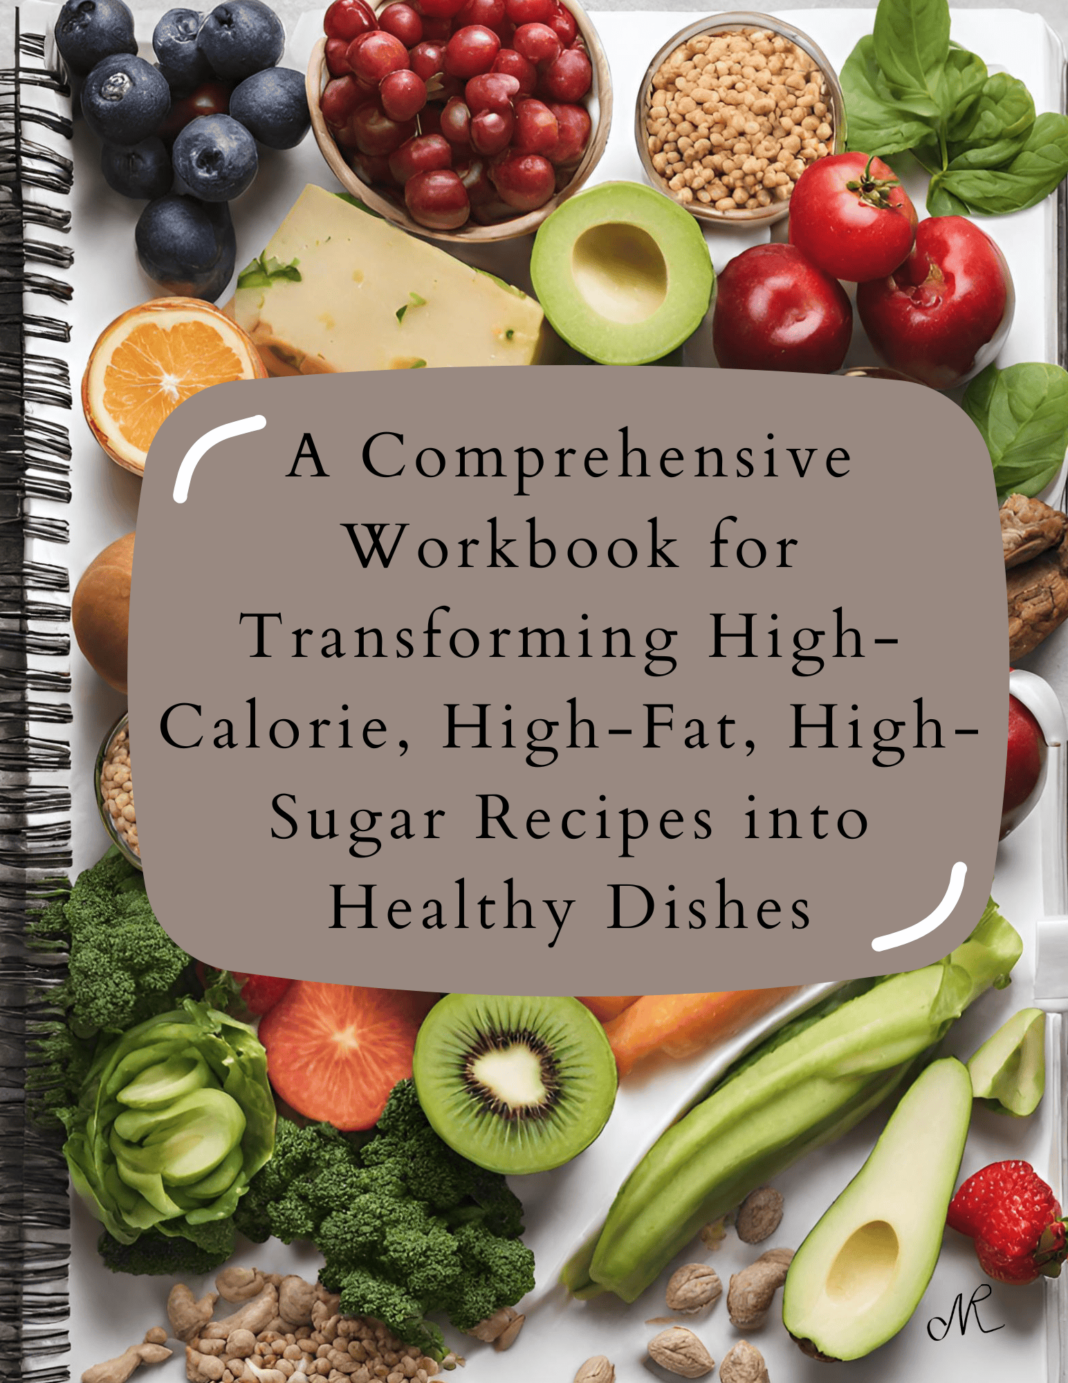 Step-By-Step Workbook for Transforming High-Calorie, High-Fat, High-Sugar Recipes into Healthy Dishes